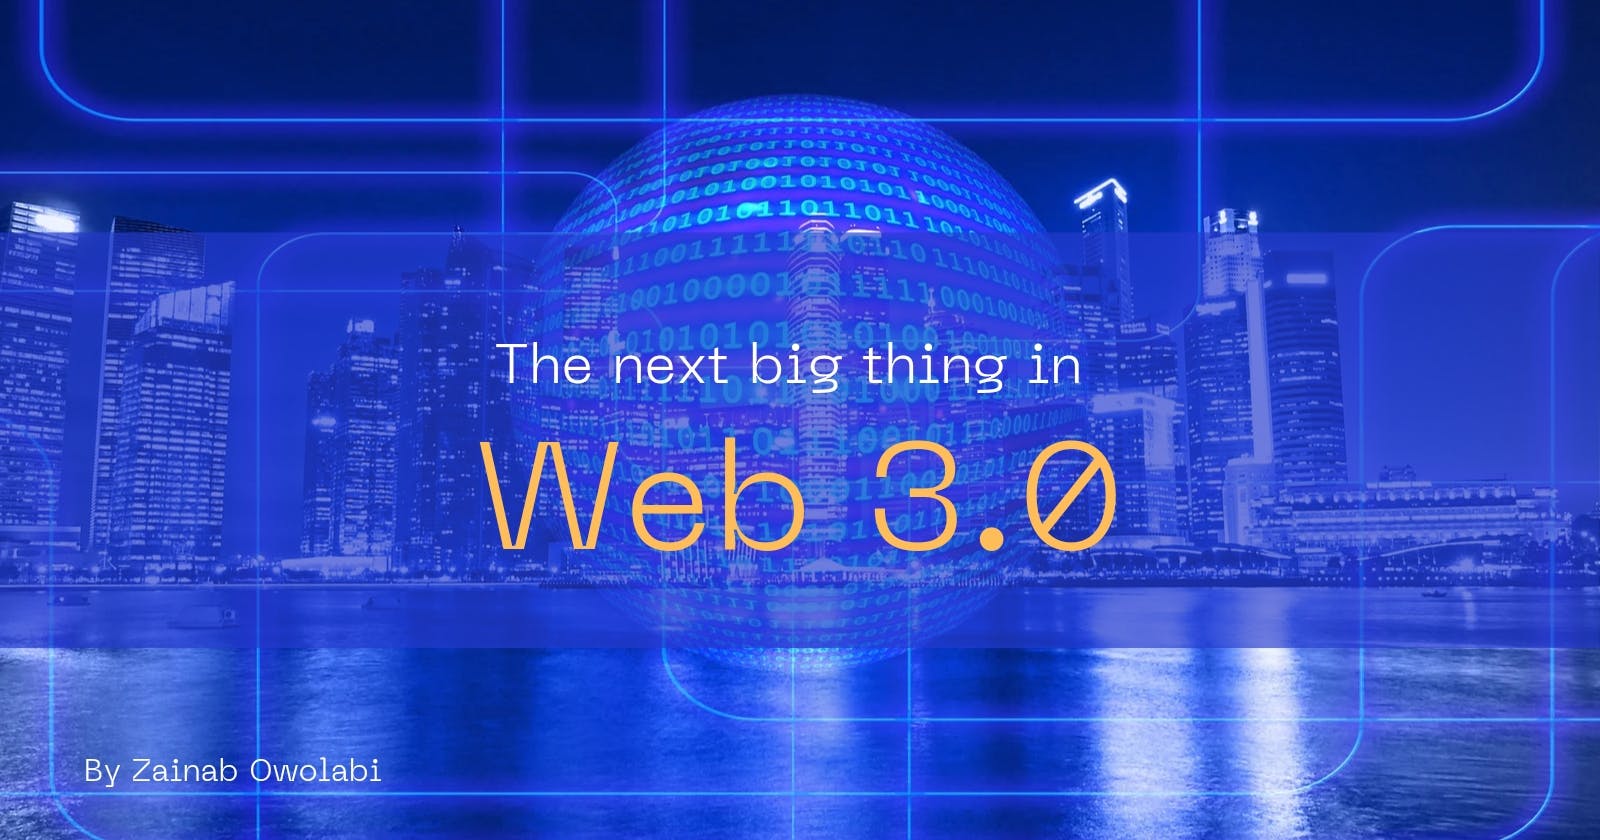 What would be the next big thing in Web3?